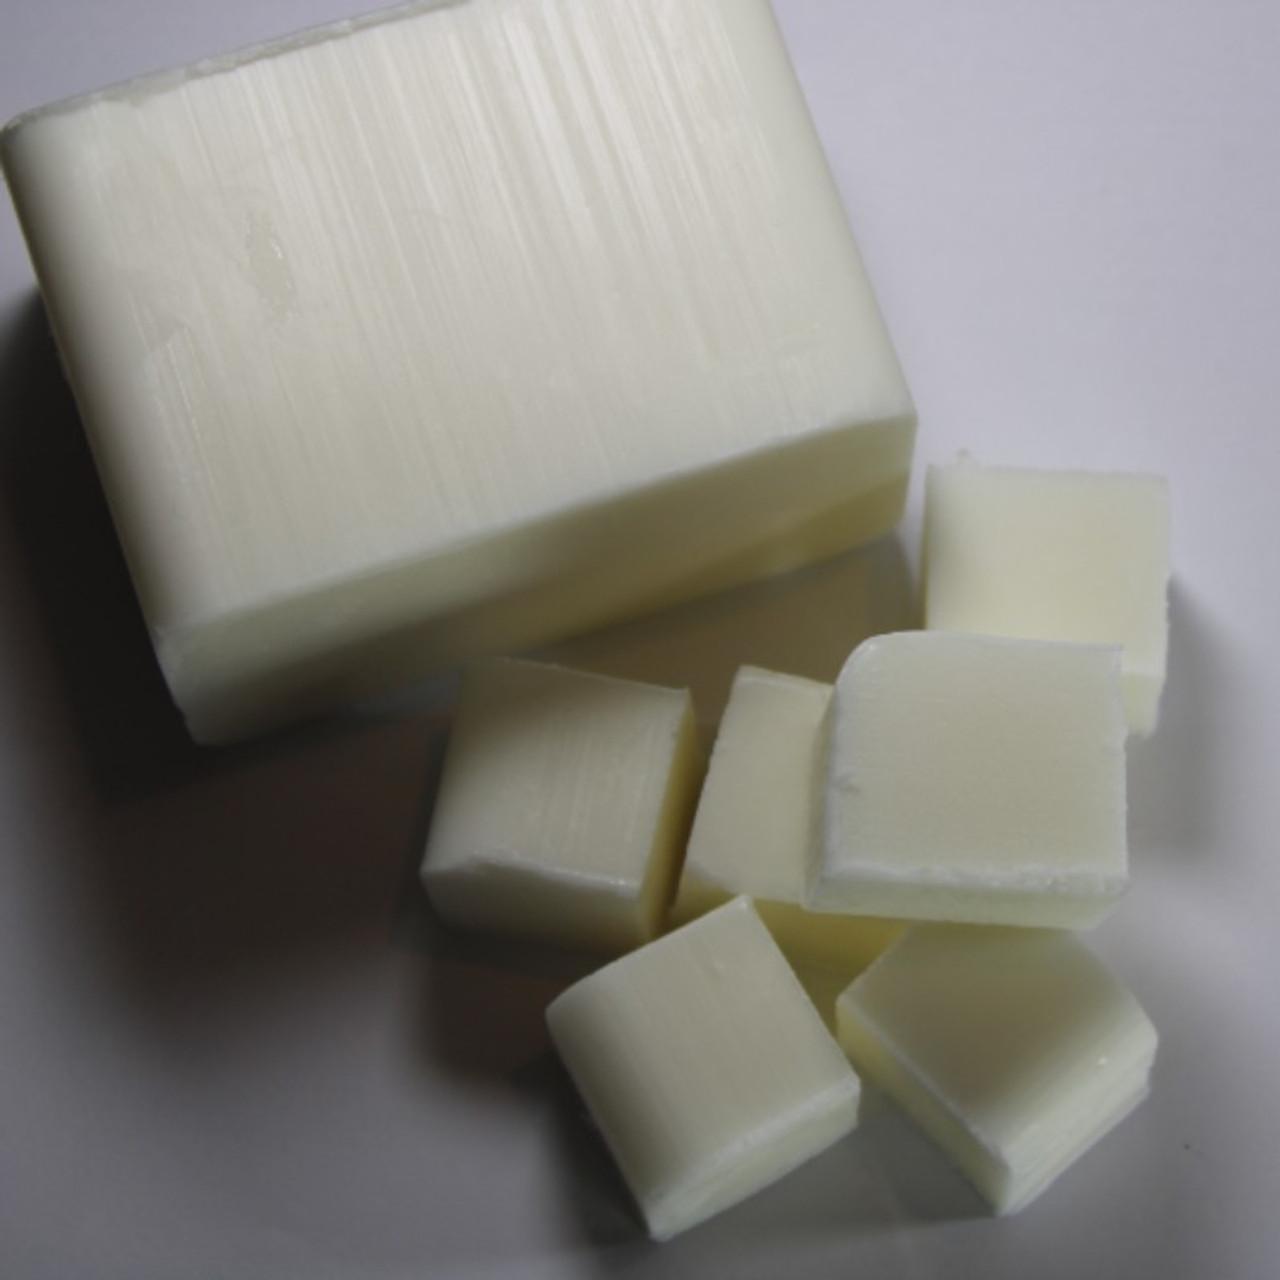 InYourNature Shea Butter Soap Base Melt and Pour for Nepal